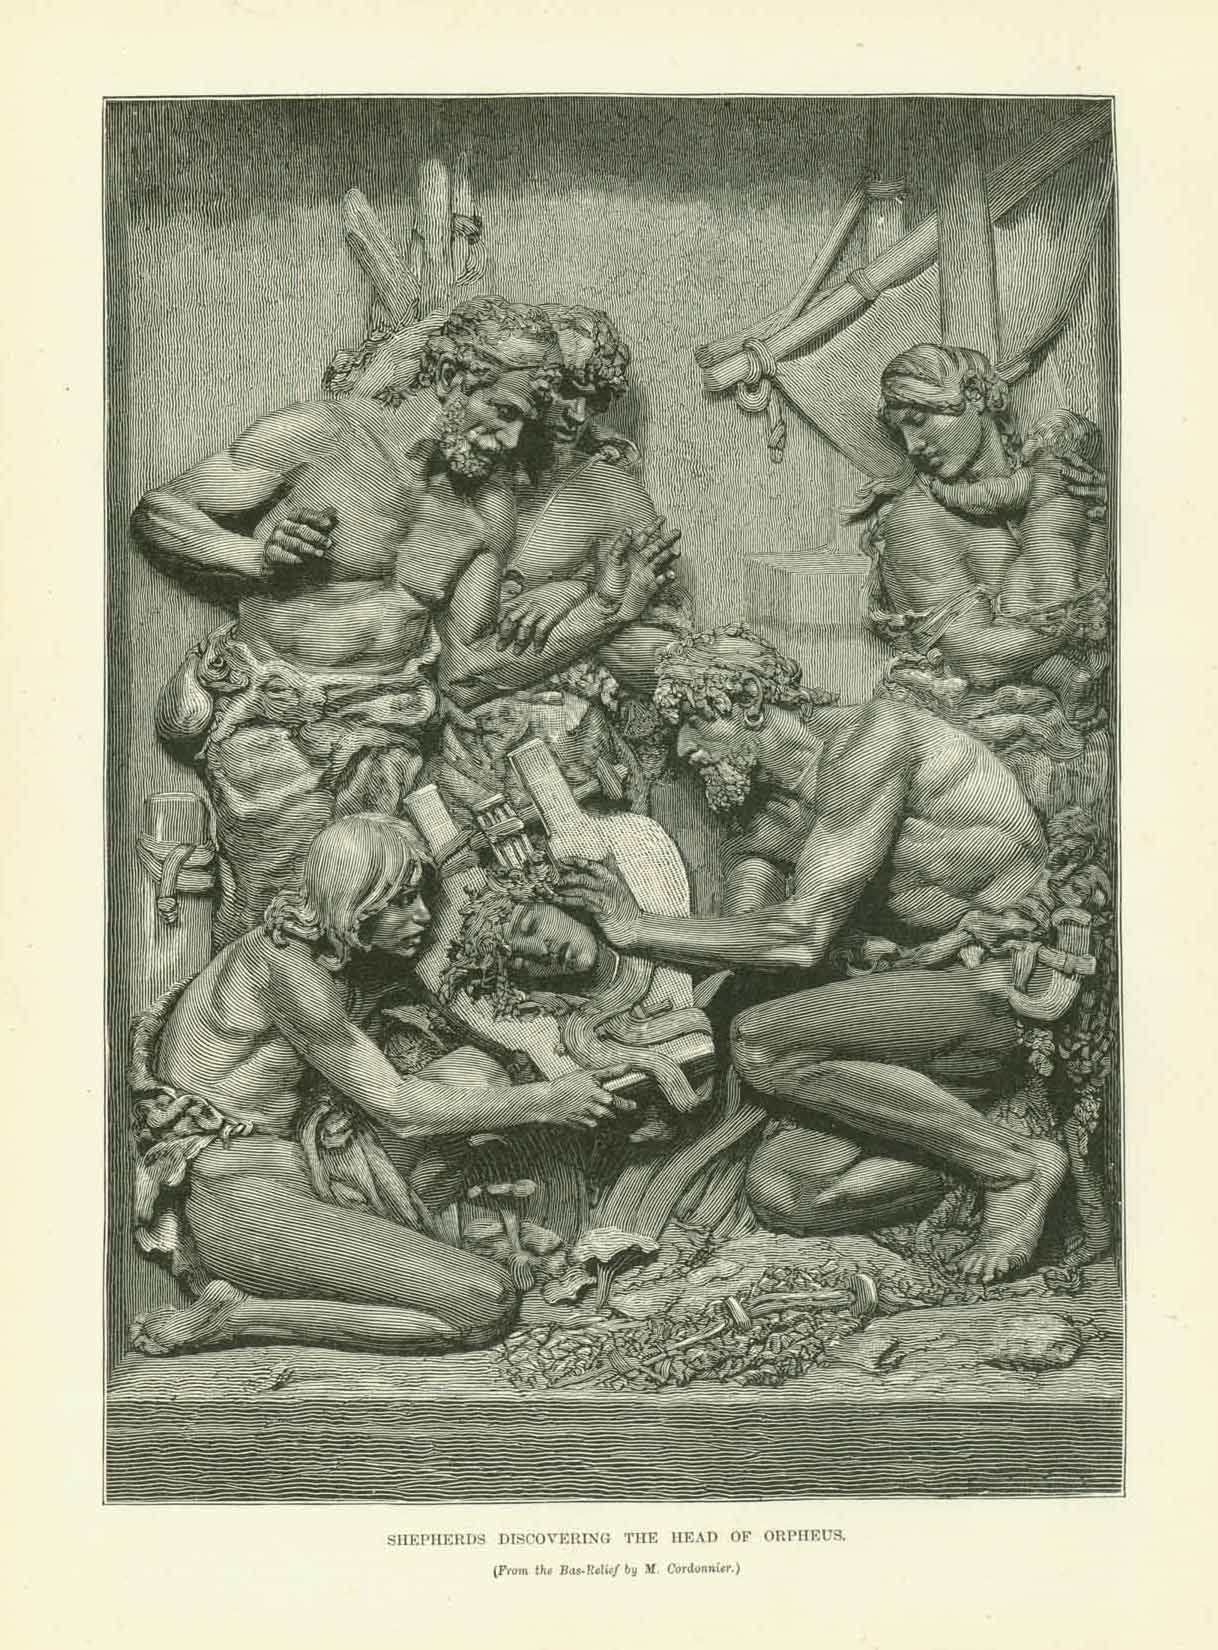 "Shepards Discovering the Head of Orpheus"  Wood engraving made after a Bas-Relief by M. Cordonnier. Published 1885. On the reverse side is an article about the bas-relief.